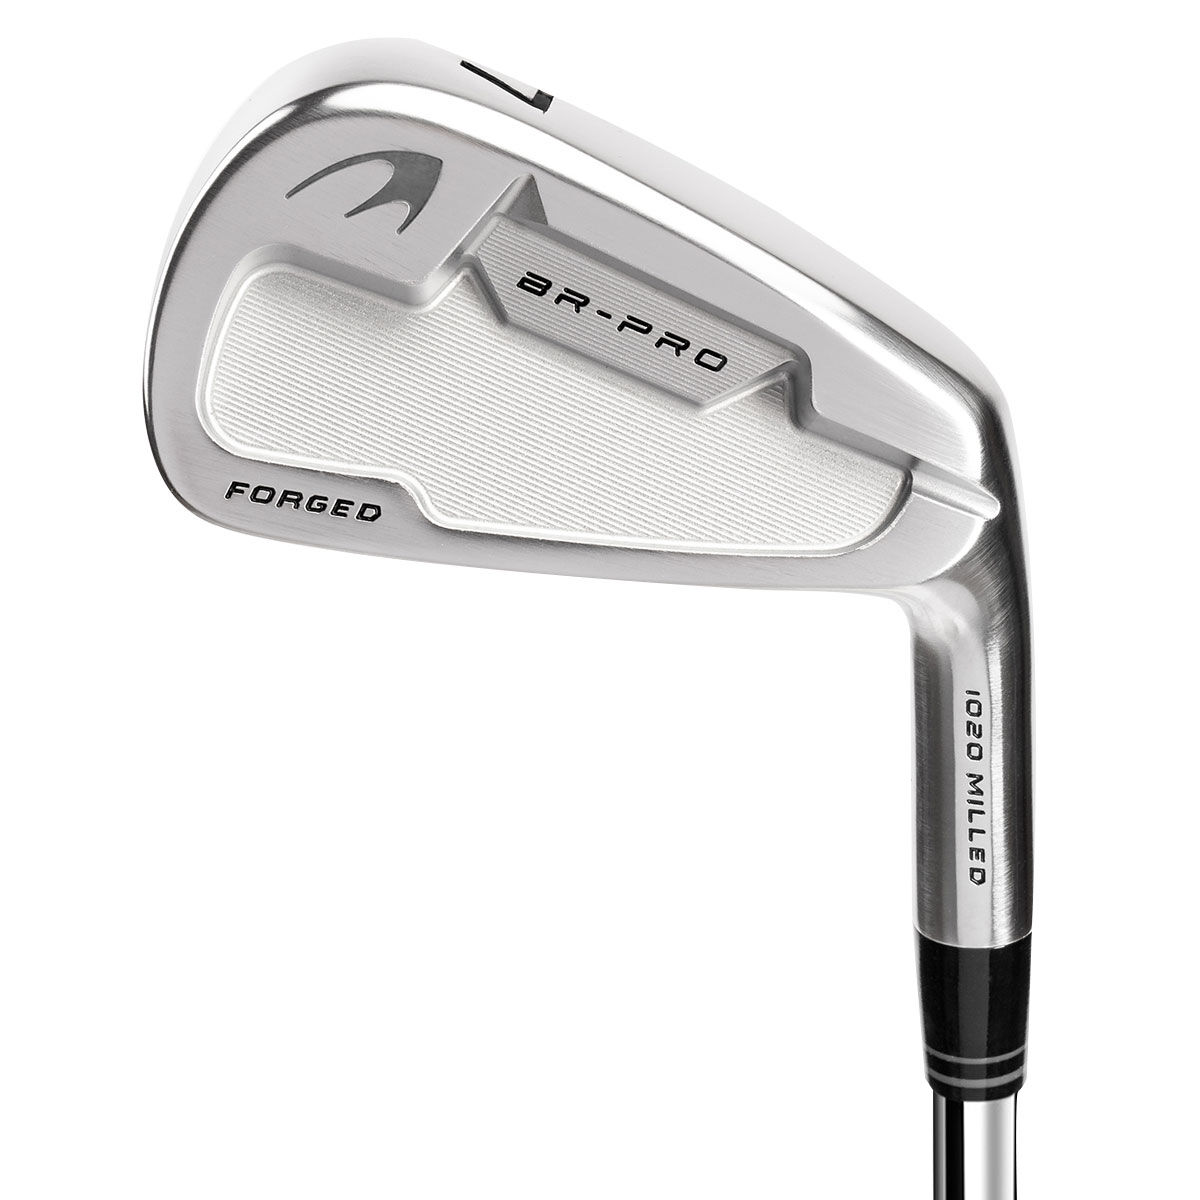 Benross Mens, Silver Br-Pro Steel Golf Irons, 4-Pw (7 Golf Irons), Right Hand, Steel, Size: Stiff | American Golf, One Size